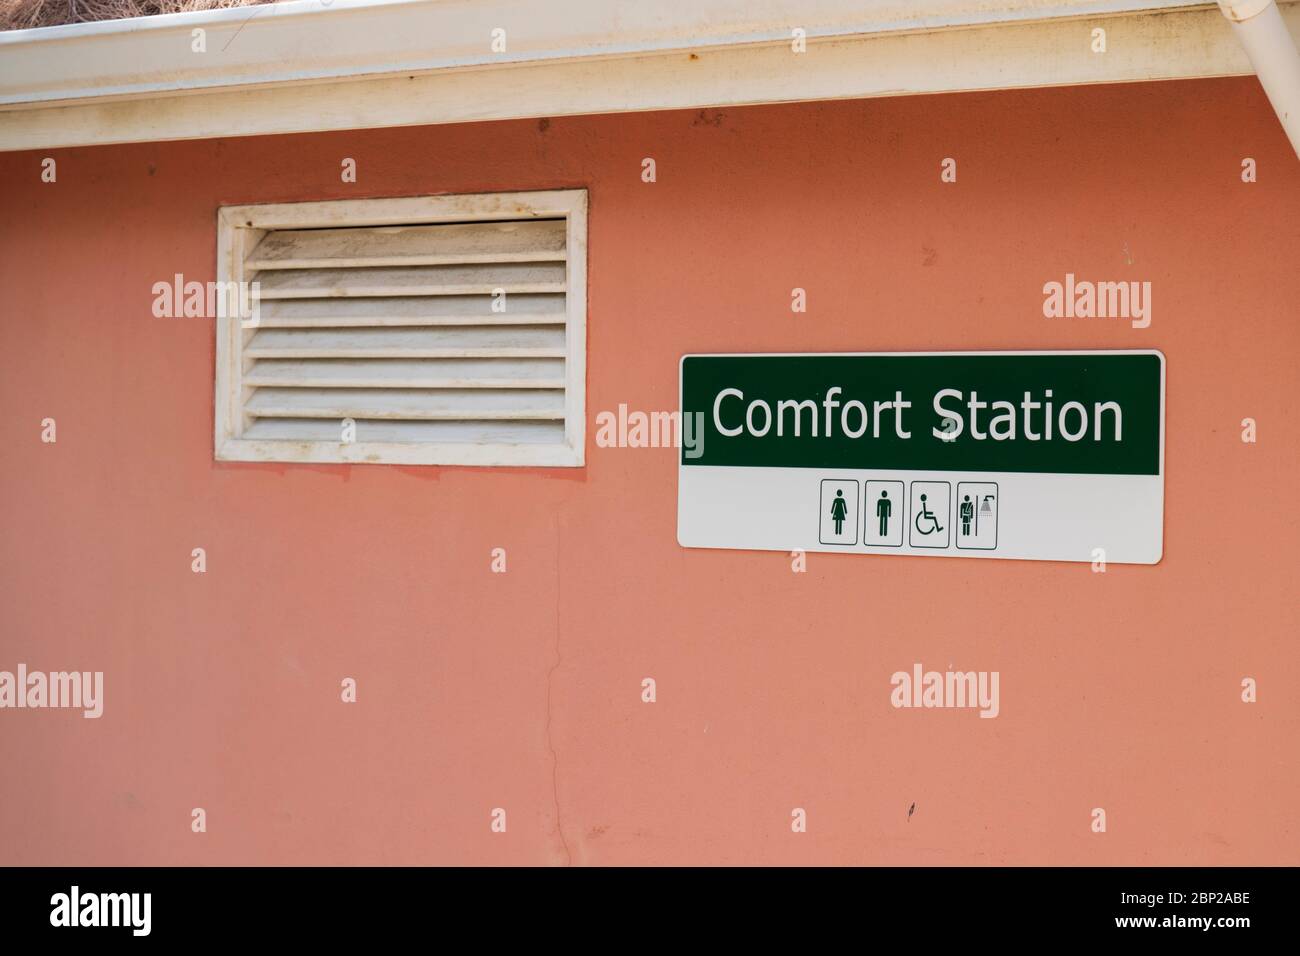 Plastic rectangular sign - comfort station stuck on a painted rendered wall Stock Photo